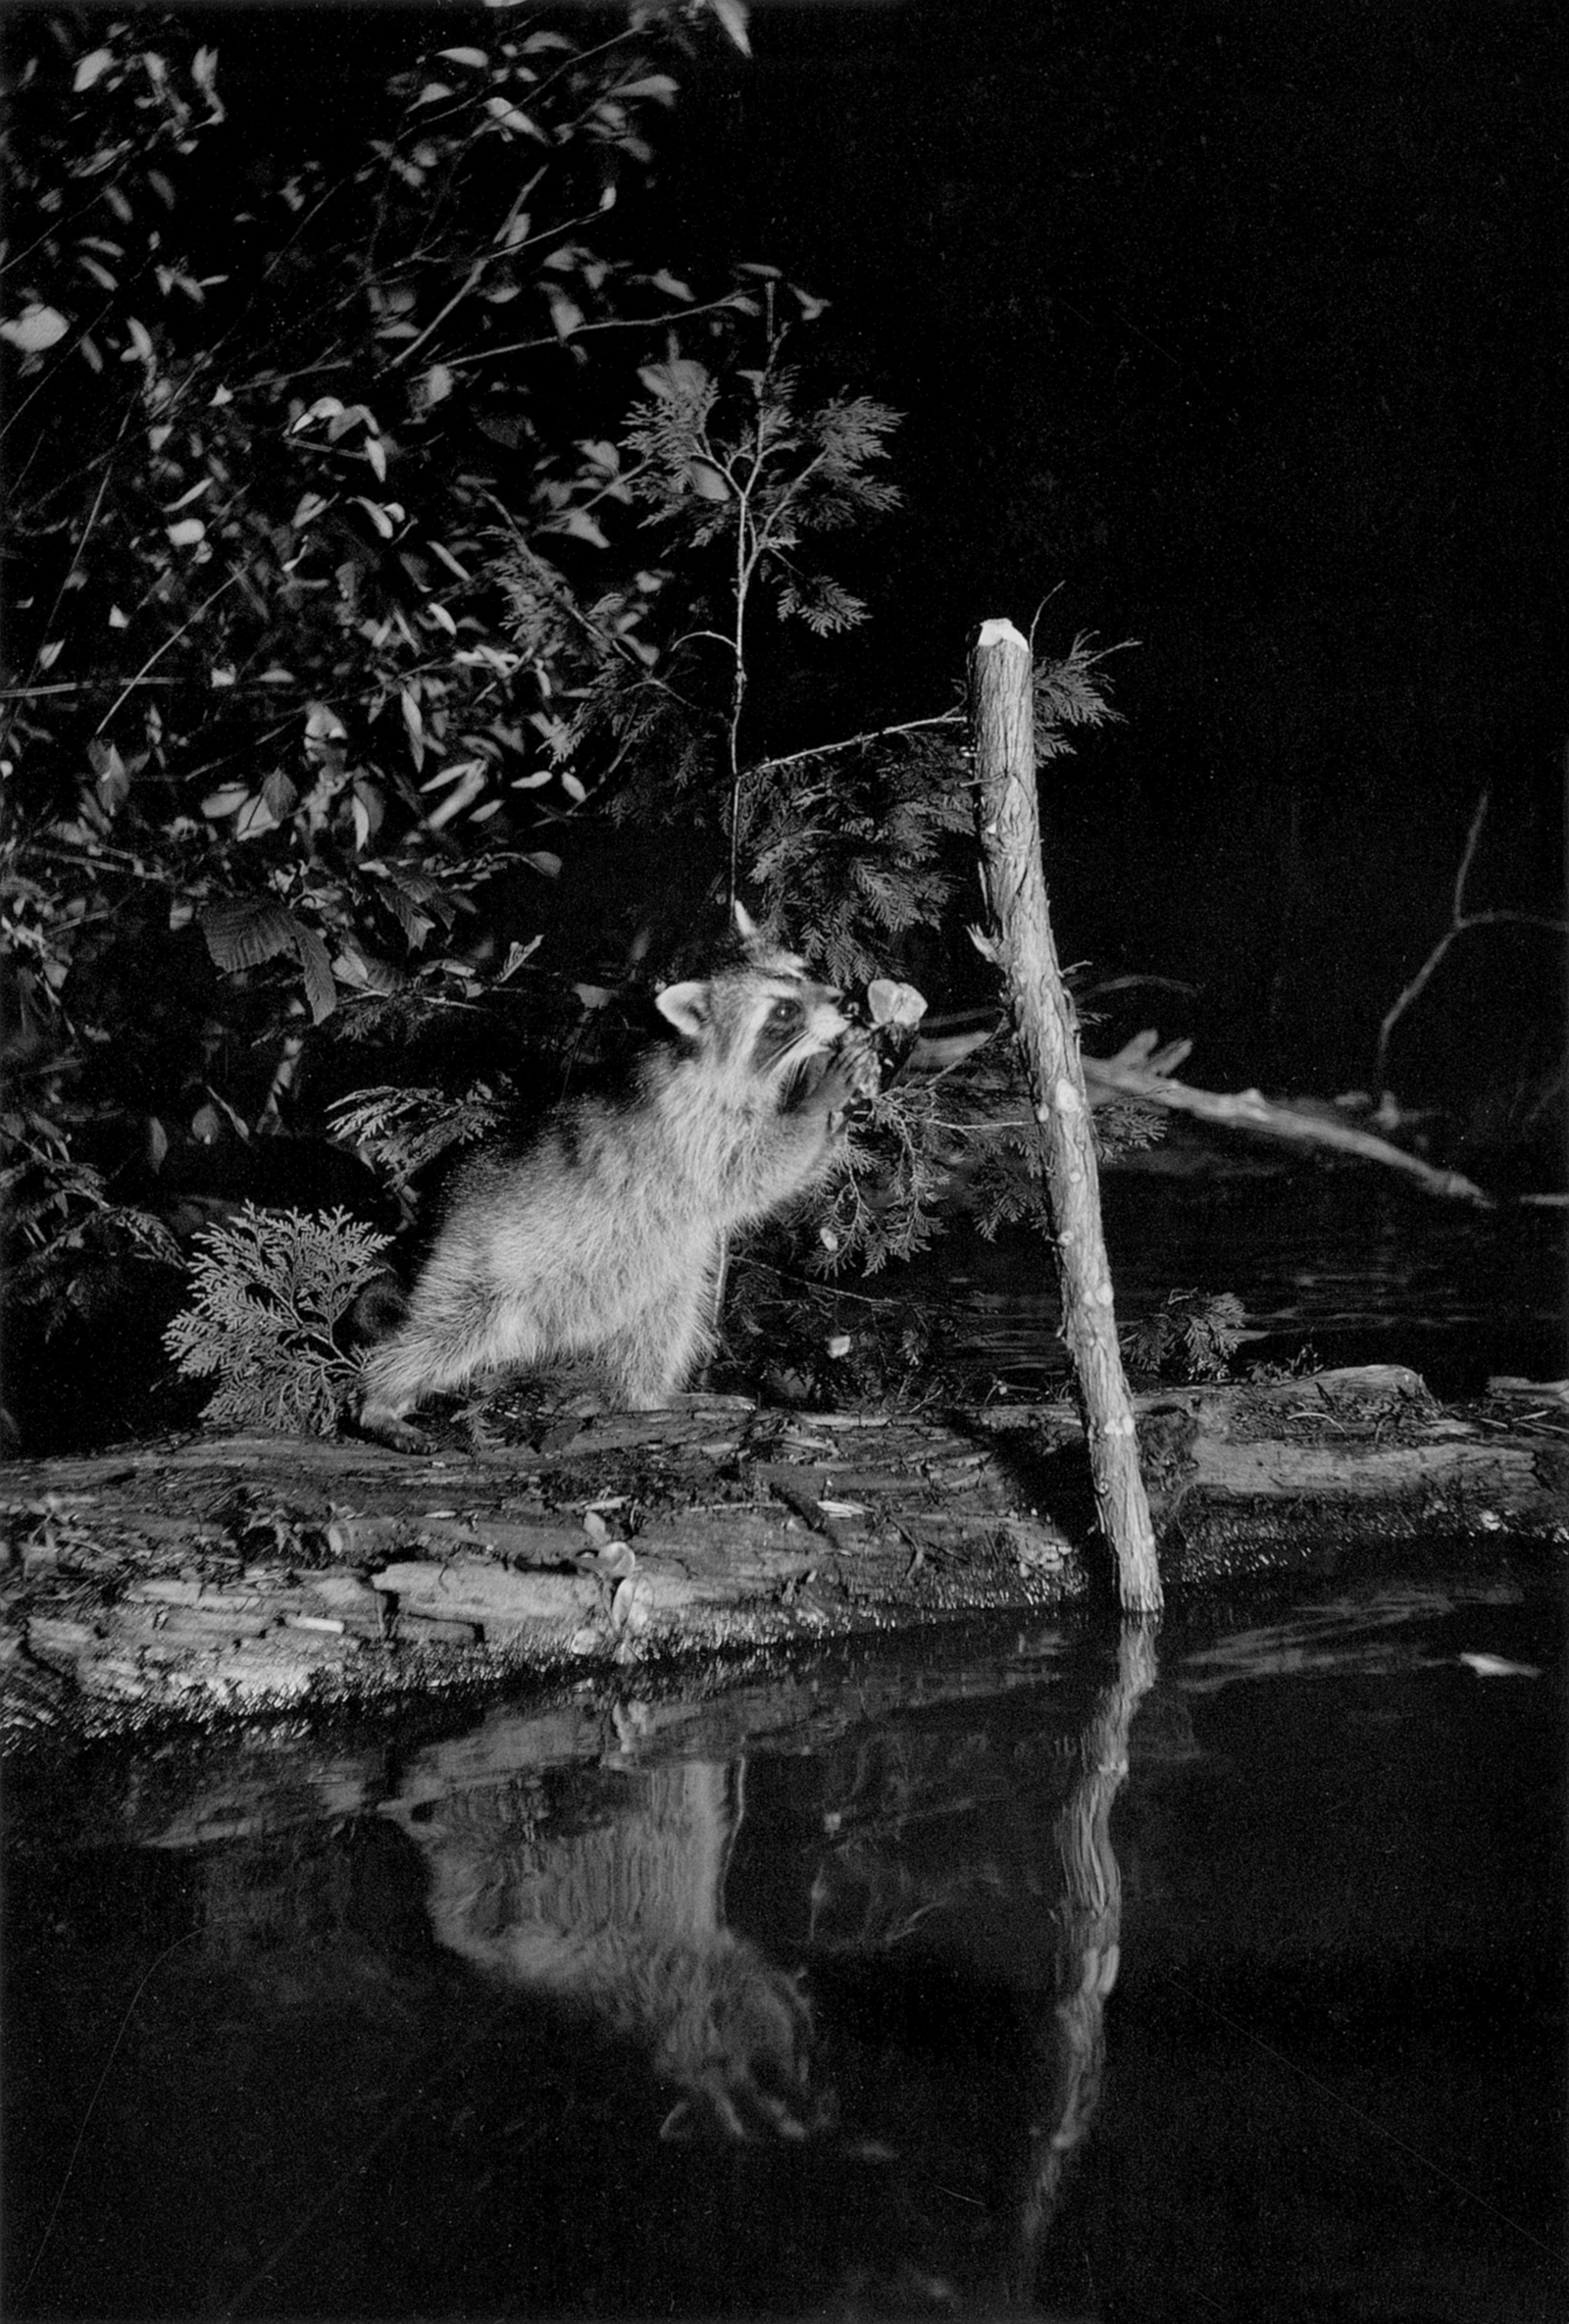 A raccoon on the northeast shore of Whitefish Lake, Michigan, 1903; photograph by George Shiras from In the Heart of the Dark Night, which collects his images of wildlife from the late nineteenth and early twentieth centuries. It is edited by Sonia Voss, with an essay by Jean-Christophe Bailly, and is published by Éditions Xavier Barral.